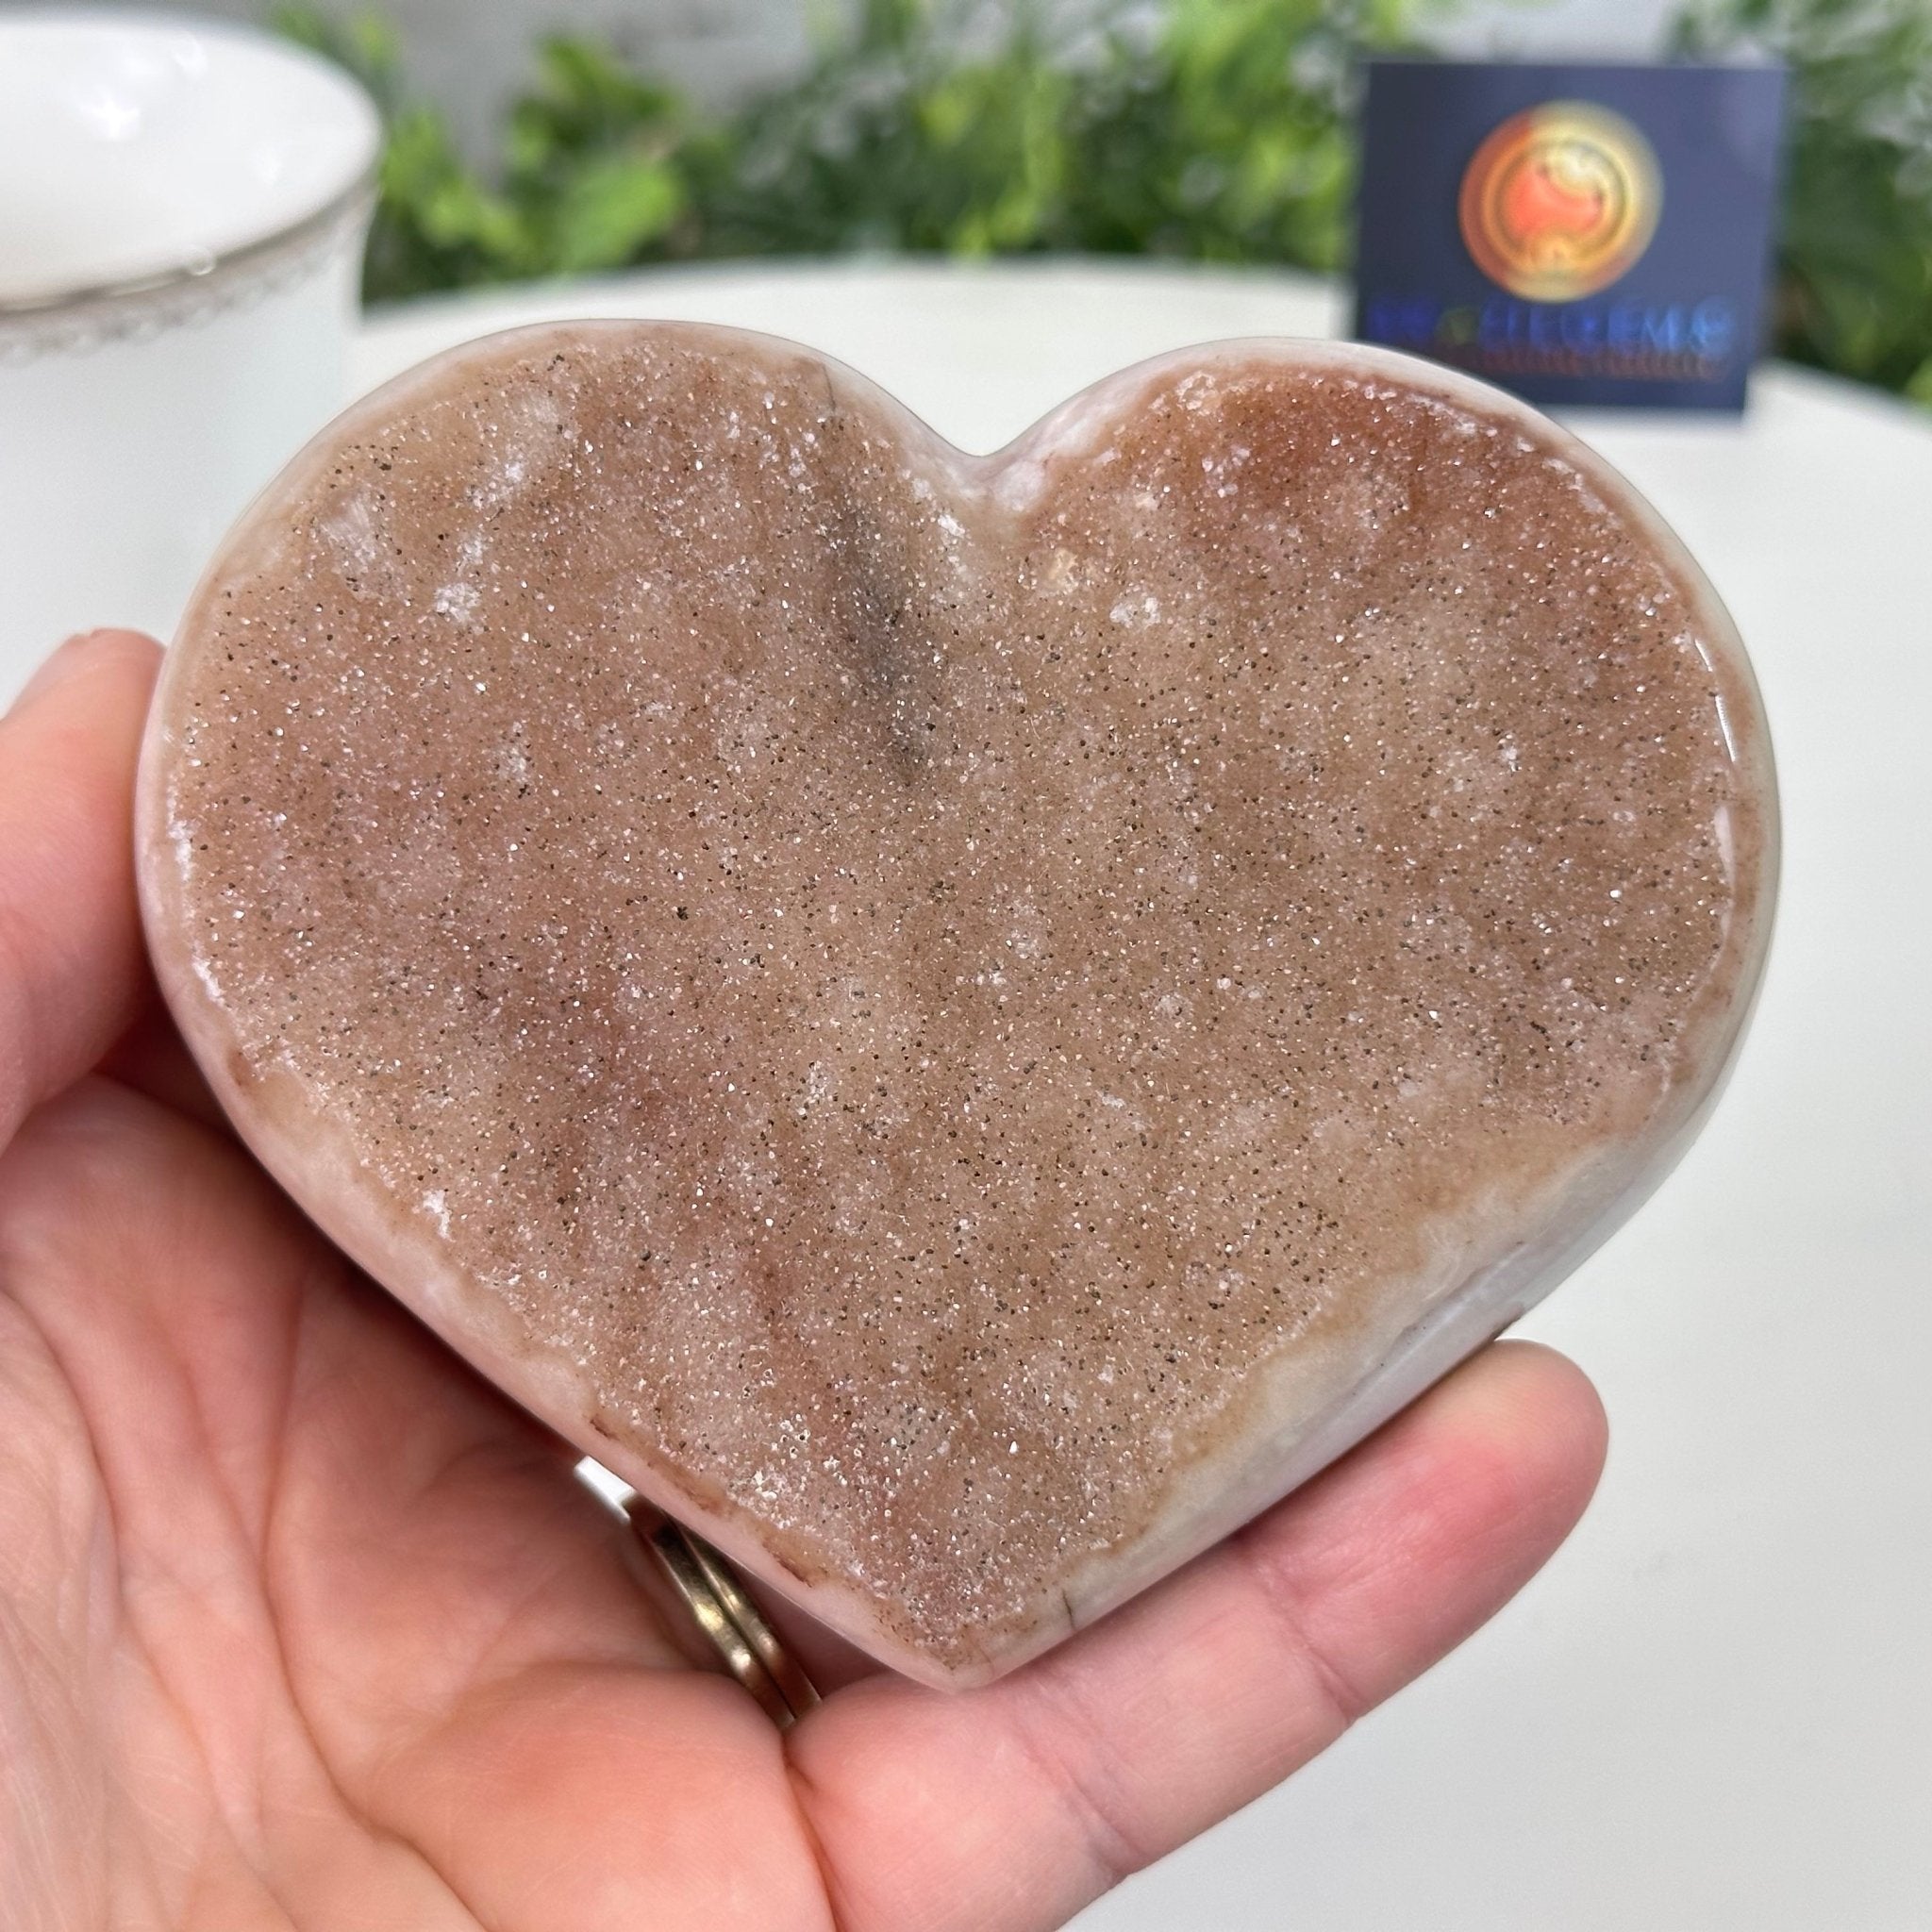 Extra Plus Quality Pink Amethyst Heart Geode on an Acrylic Stand, 0.98 lbs & 3" Tall #5462-0053 by Brazil Gems - Brazil GemsBrazil GemsExtra Plus Quality Pink Amethyst Heart Geode on an Acrylic Stand, 0.98 lbs & 3" Tall #5462-0053 by Brazil GemsHearts5462-0053